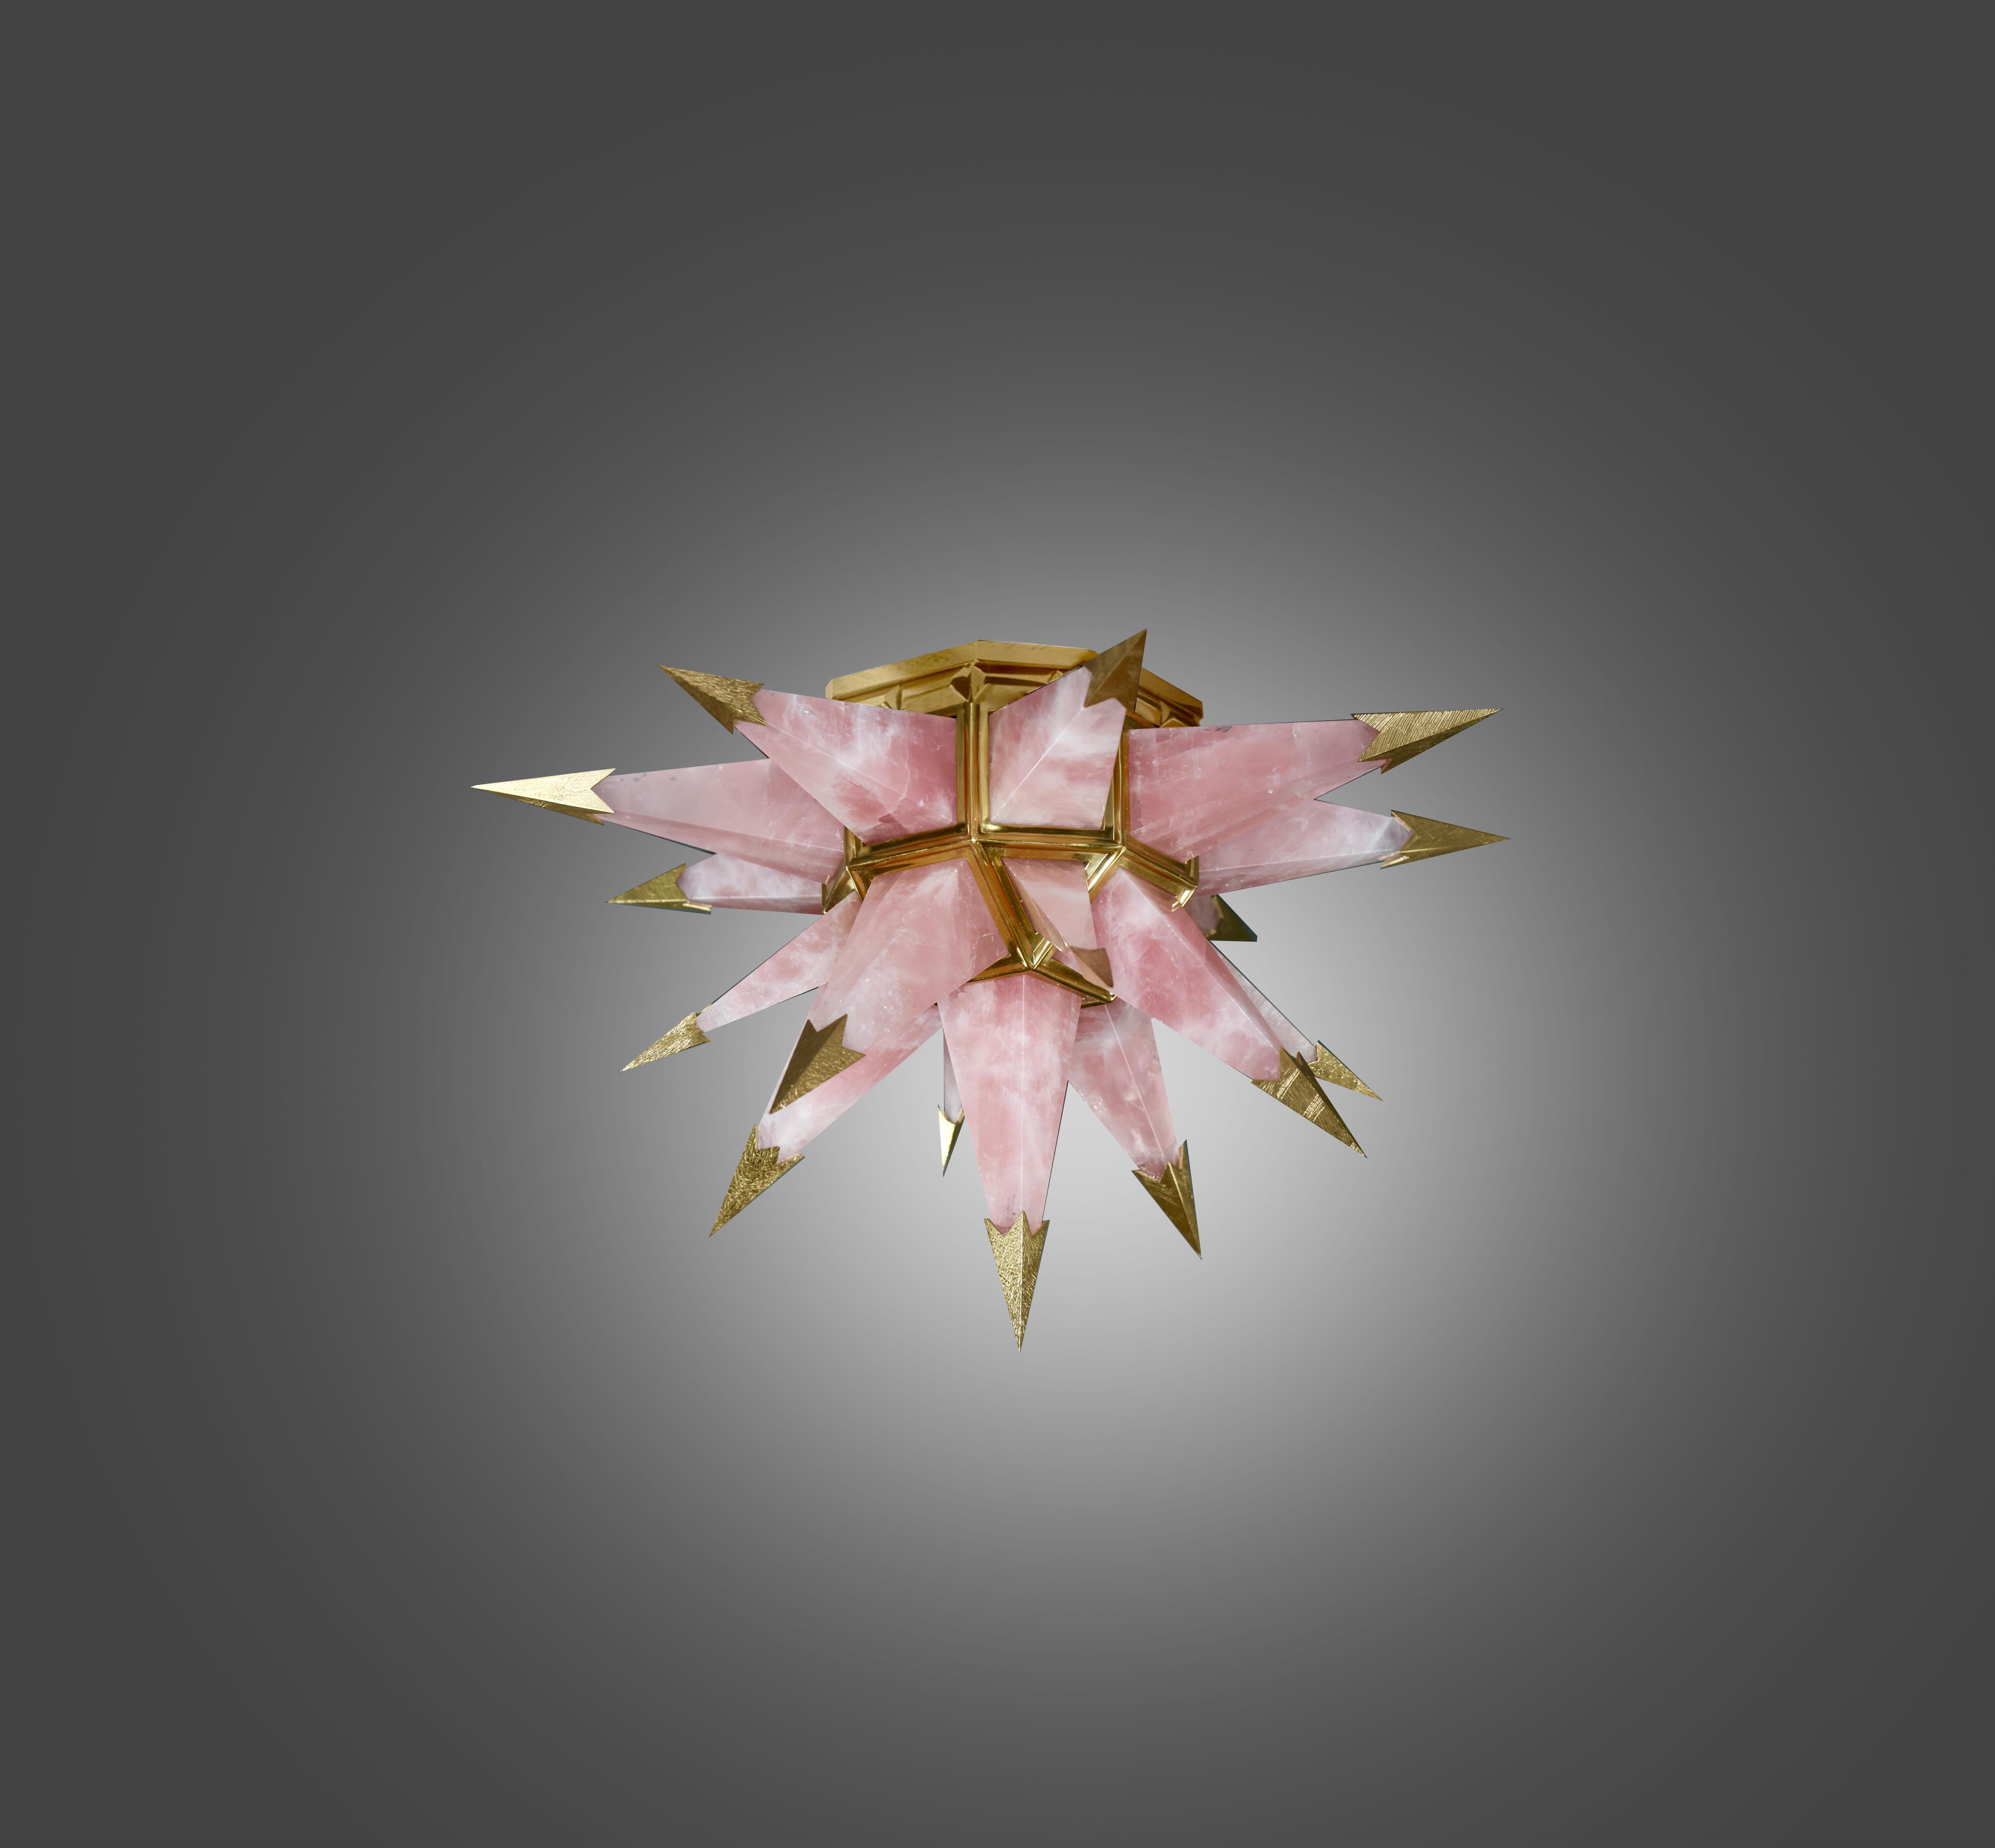 Pair of star form pink rock crystal flush mounts with polish brass frame and tip. Created by Phoenix Gallery, NYC. 
Each flush mount installed two sockets, use 2 candelabra lightbulbs, 160W total

Custom size, quantity, and finish upon